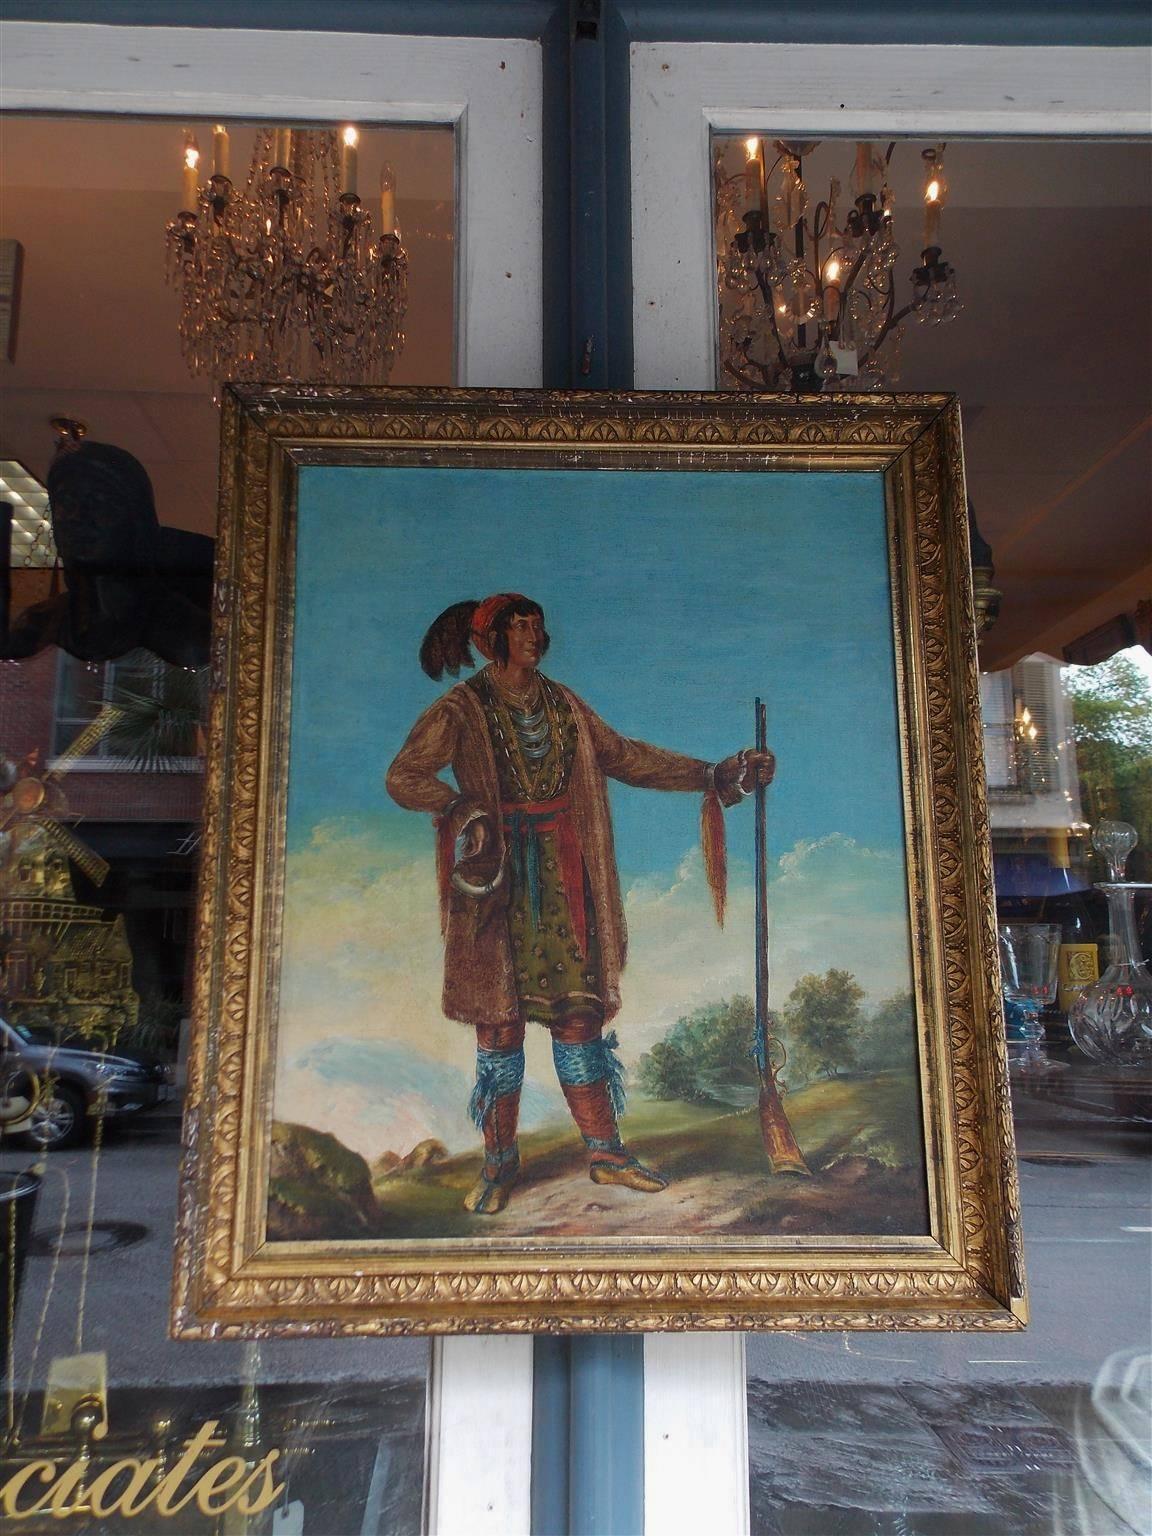 American oil on canvas portrait of Osceola standing with Musket in the original gilt floral frame. Landscape in background, Late 19th century

Osceola was a Seminole war chief who led the resistance to the Campaign by U.S. Federal troops to forcibly